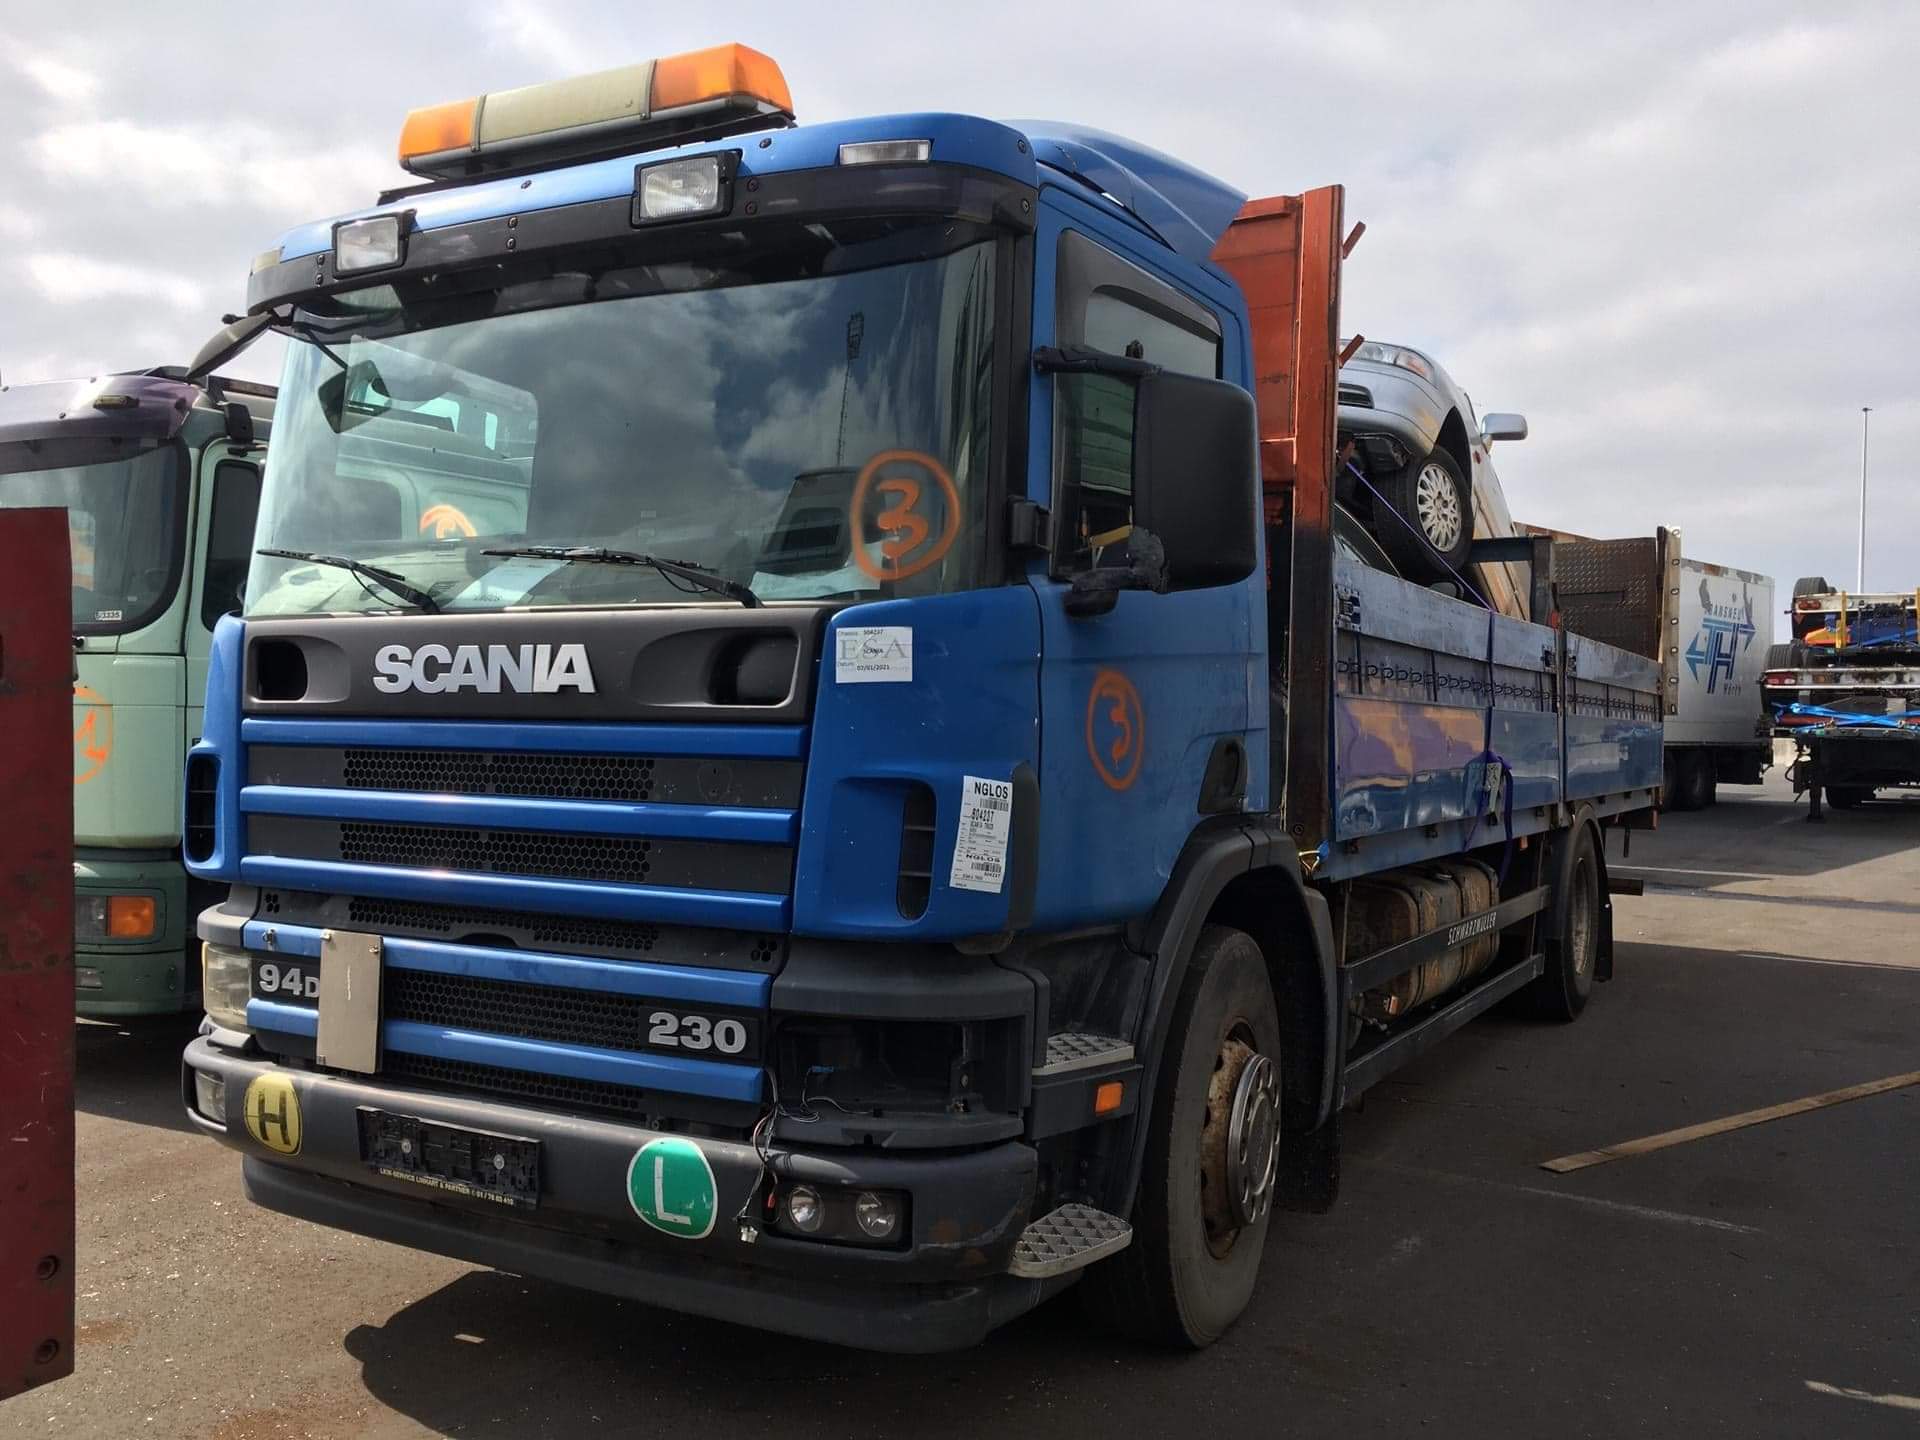 Scania Truck For Sale ,model 94D 230 , 2003.good price at cheap